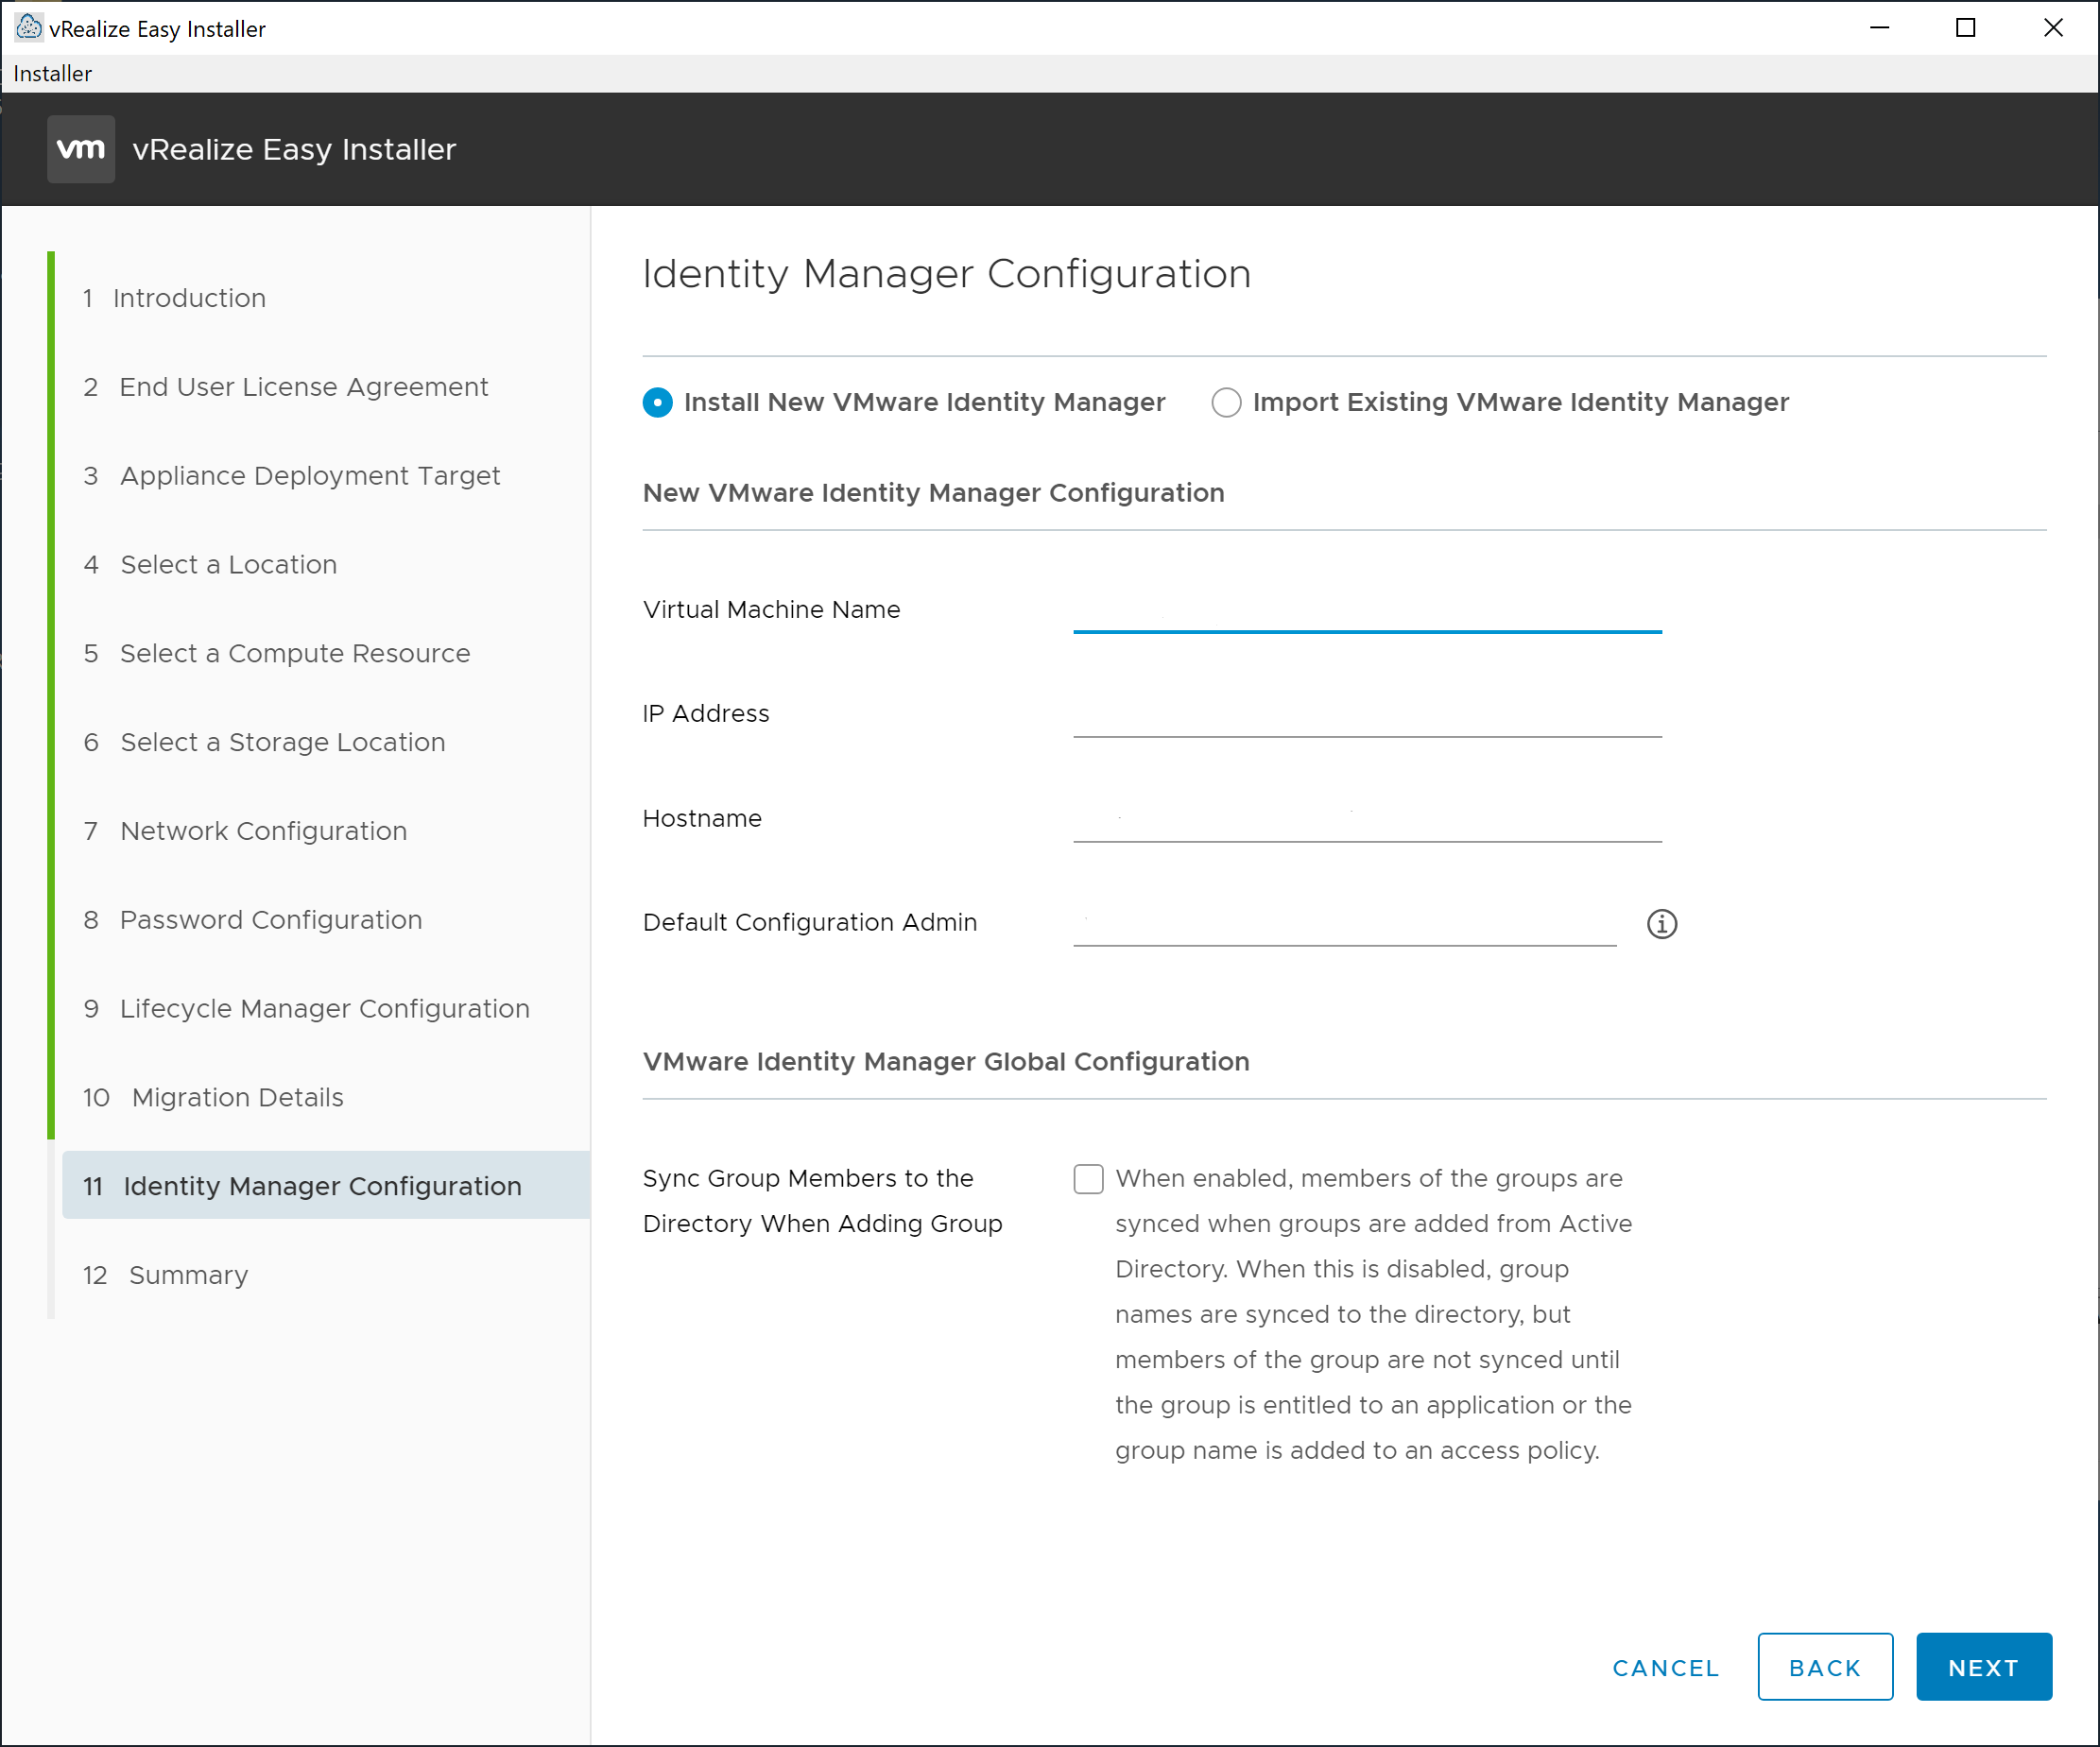 vRealize Easy Installer - Migrate - Identity Manager Configuration - Install New VMware Identity Manager